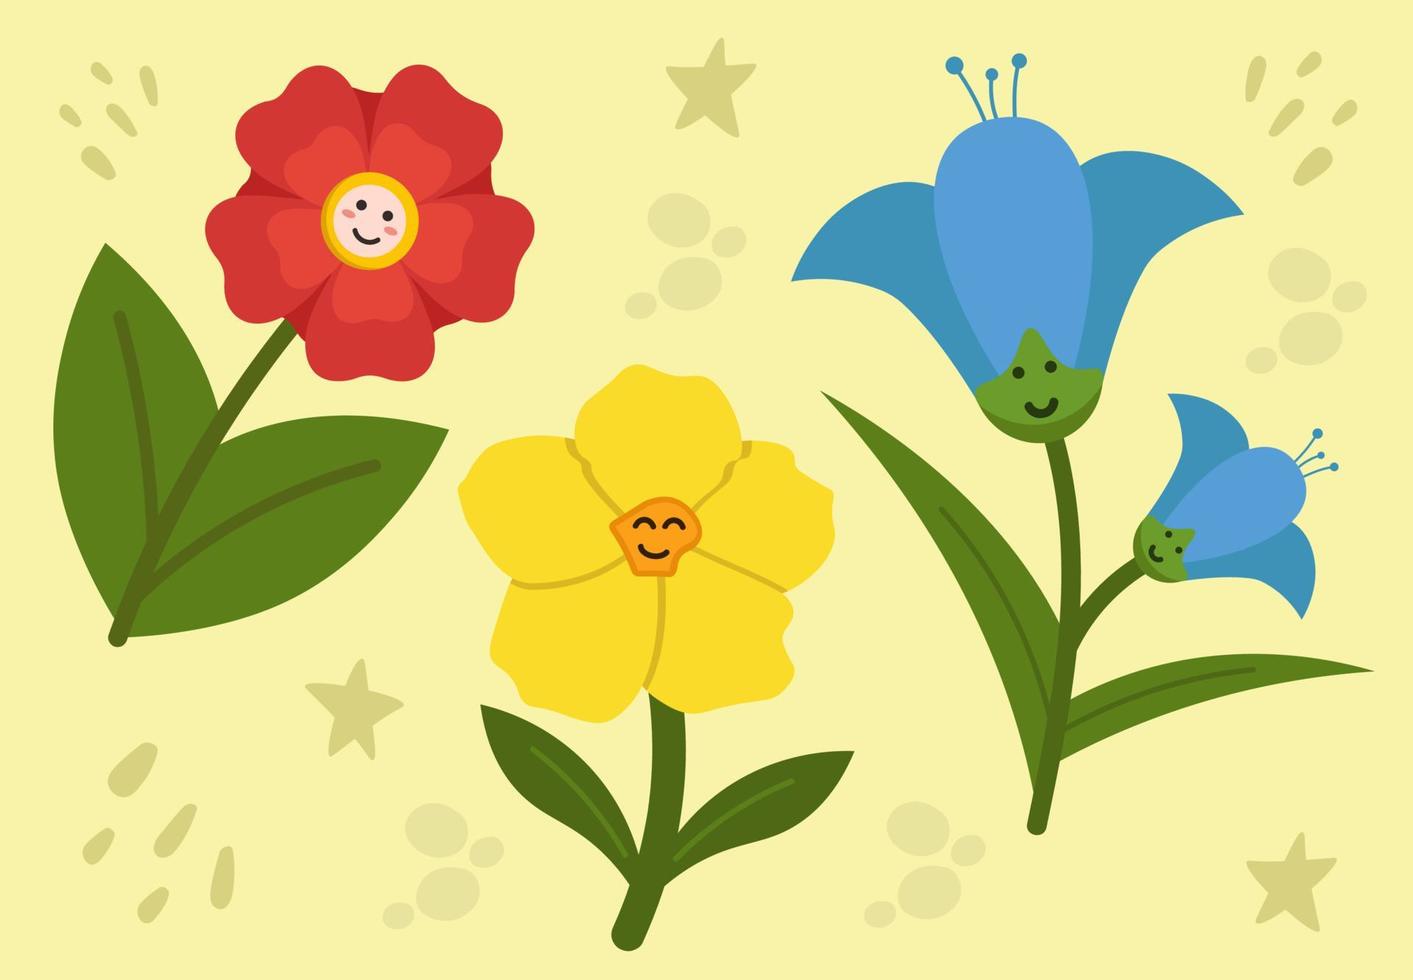 Collection Of Happy Flowers With Faces Colorful Vector Illustration In Flat Style